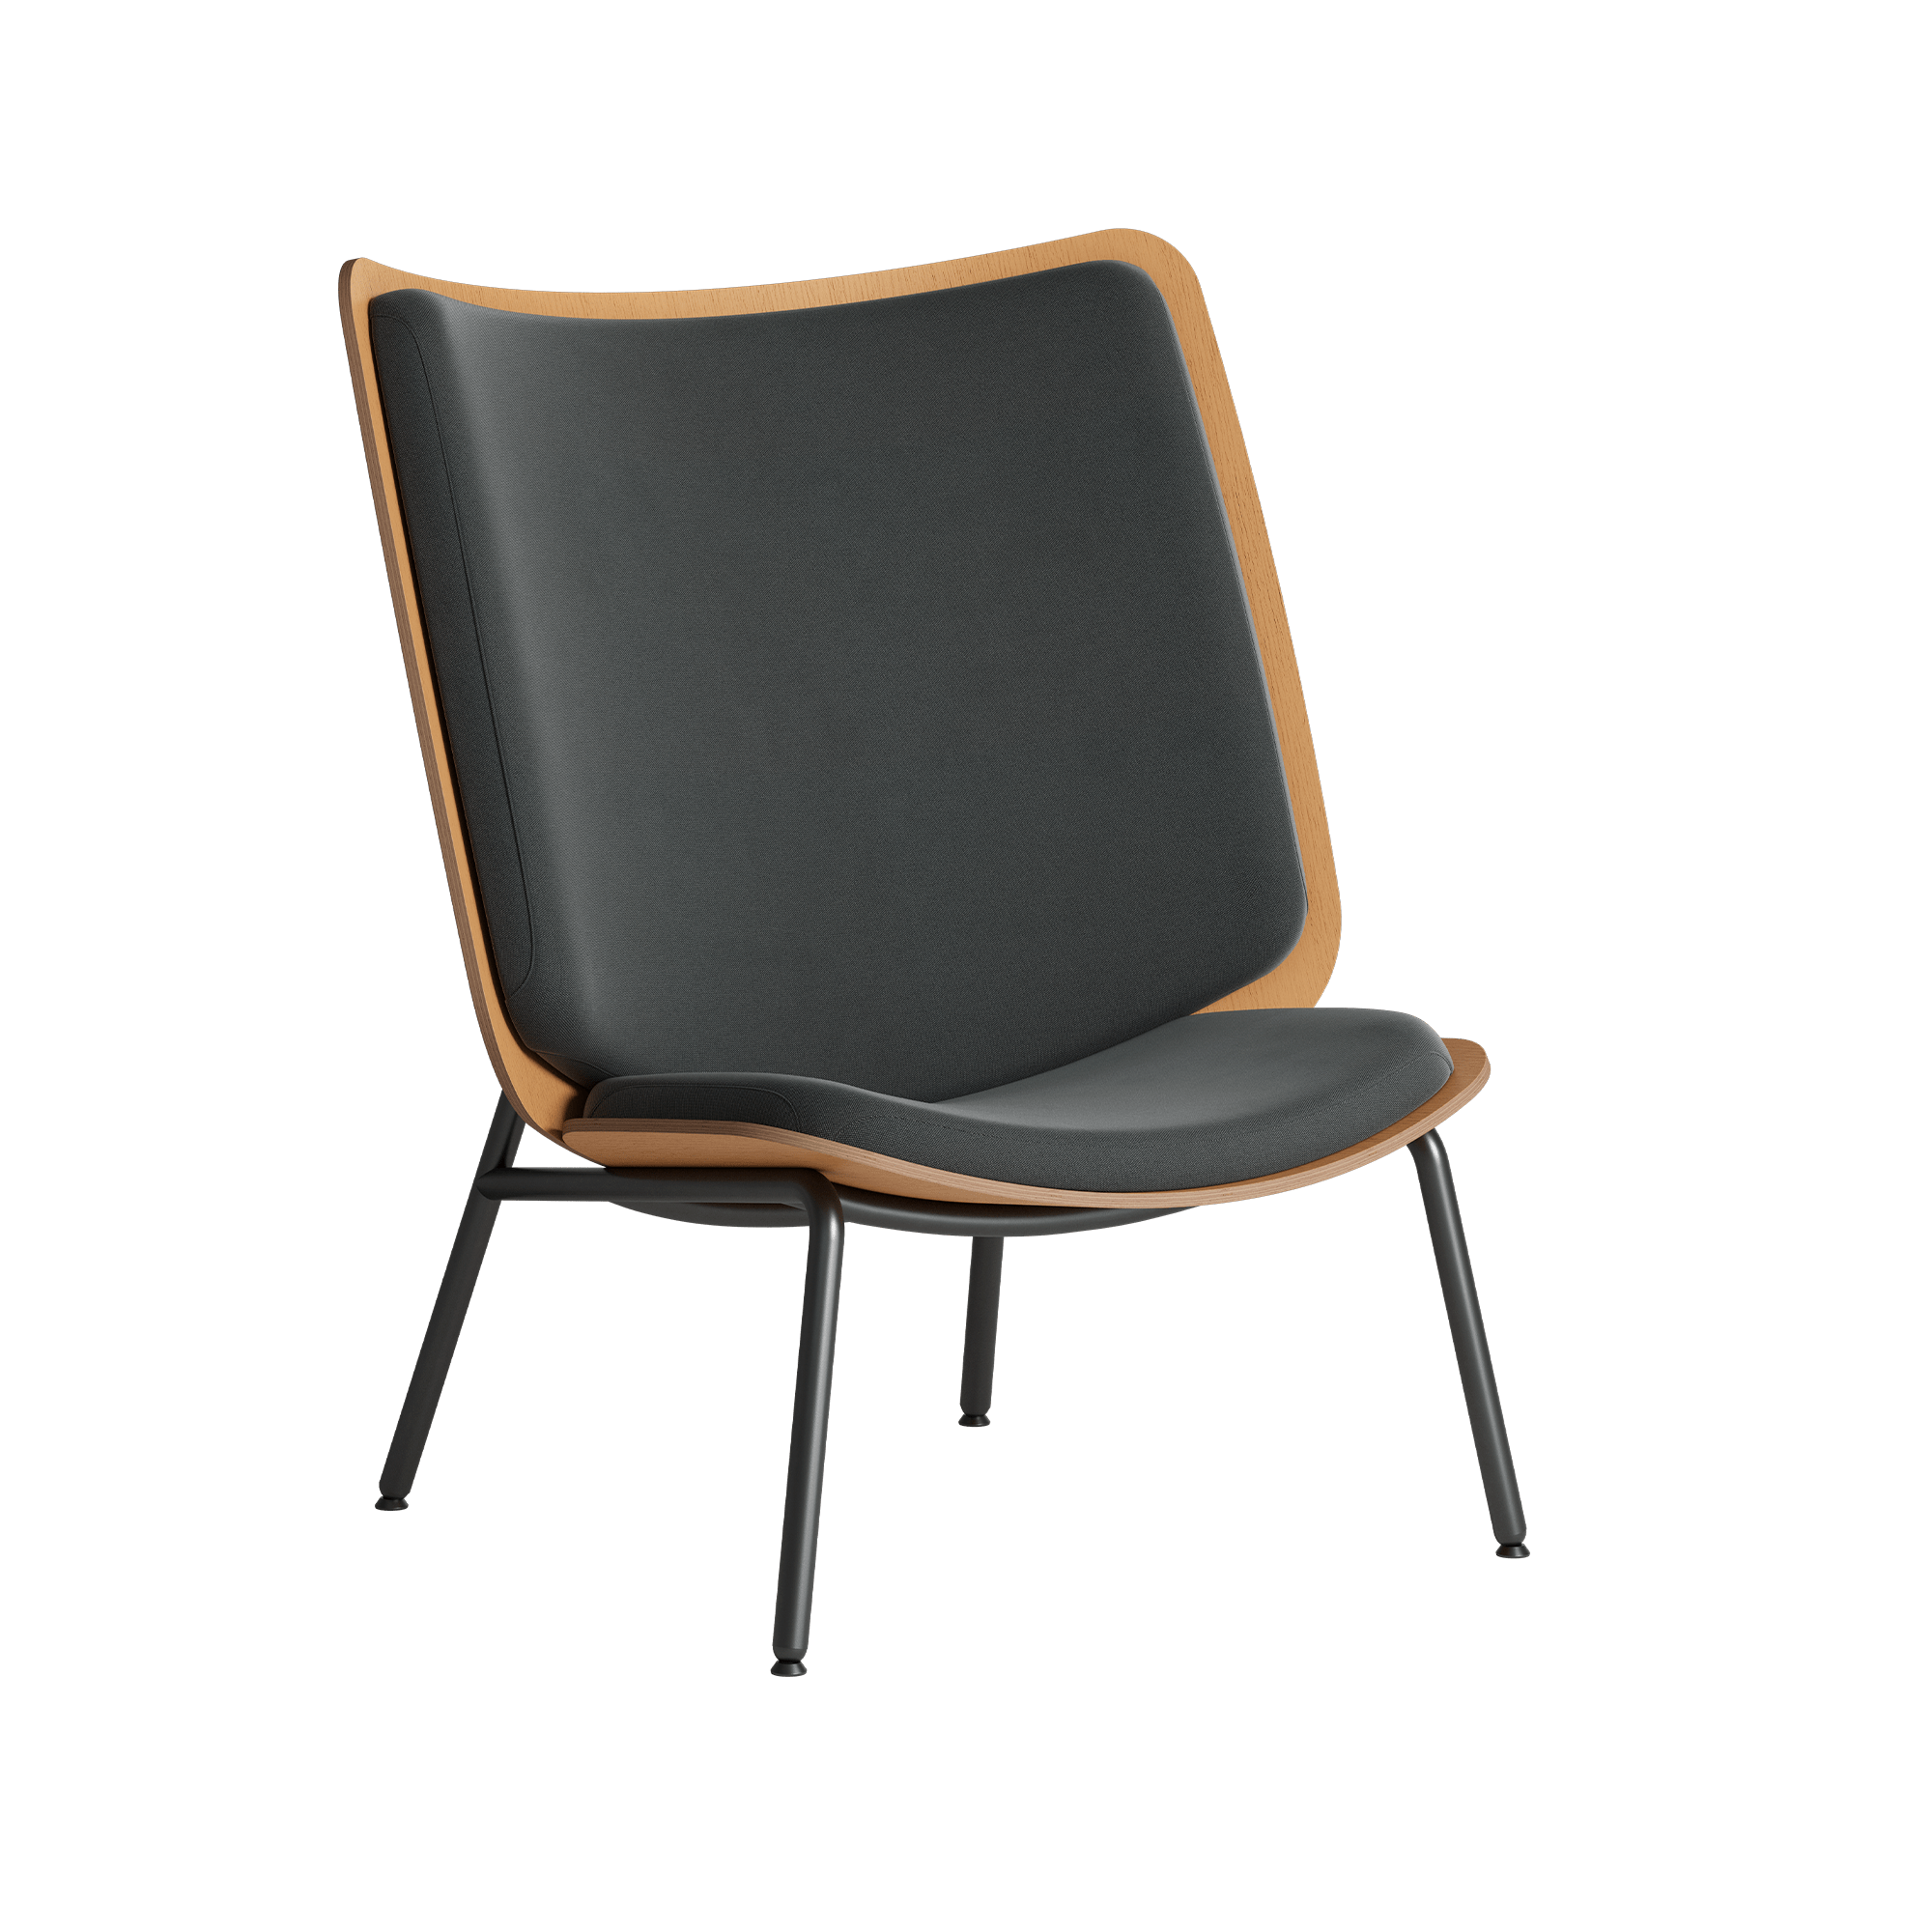 The lounge chair with black leather and wooden frame.